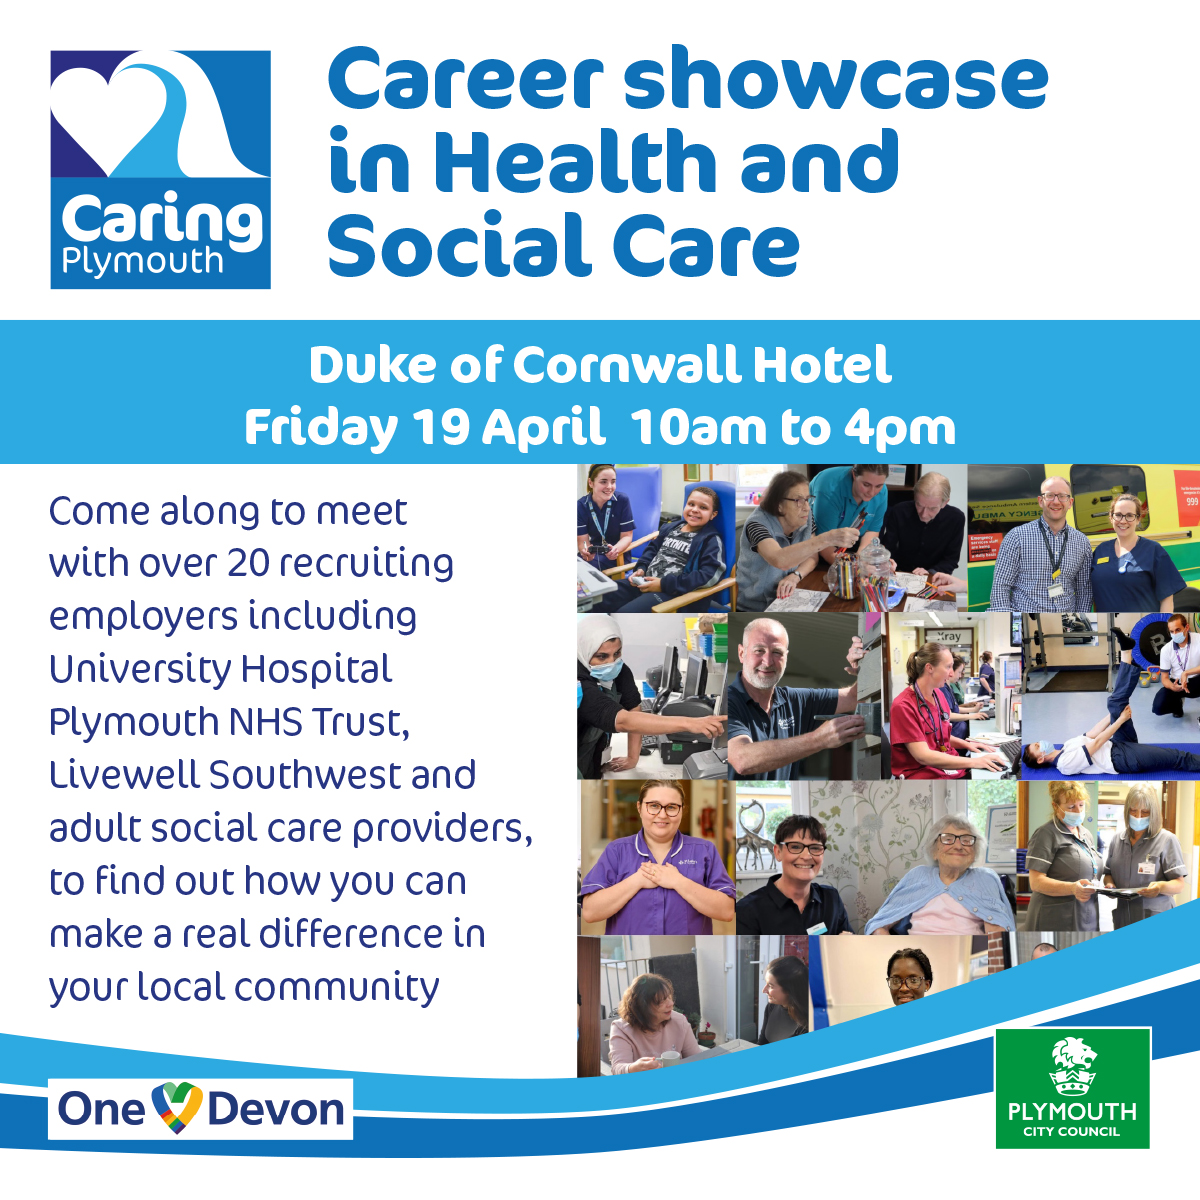 Come to the Careers Showcase in Health and Social Care at the Duke of Cornwall Hotel on 19 April, 10am to 4pm and find out about a career in health and social care. Register here: ow.ly/wRxB50R4fB0 @livewellsw @CaringPlymouth @plymouthcc @TheDukePlymouth